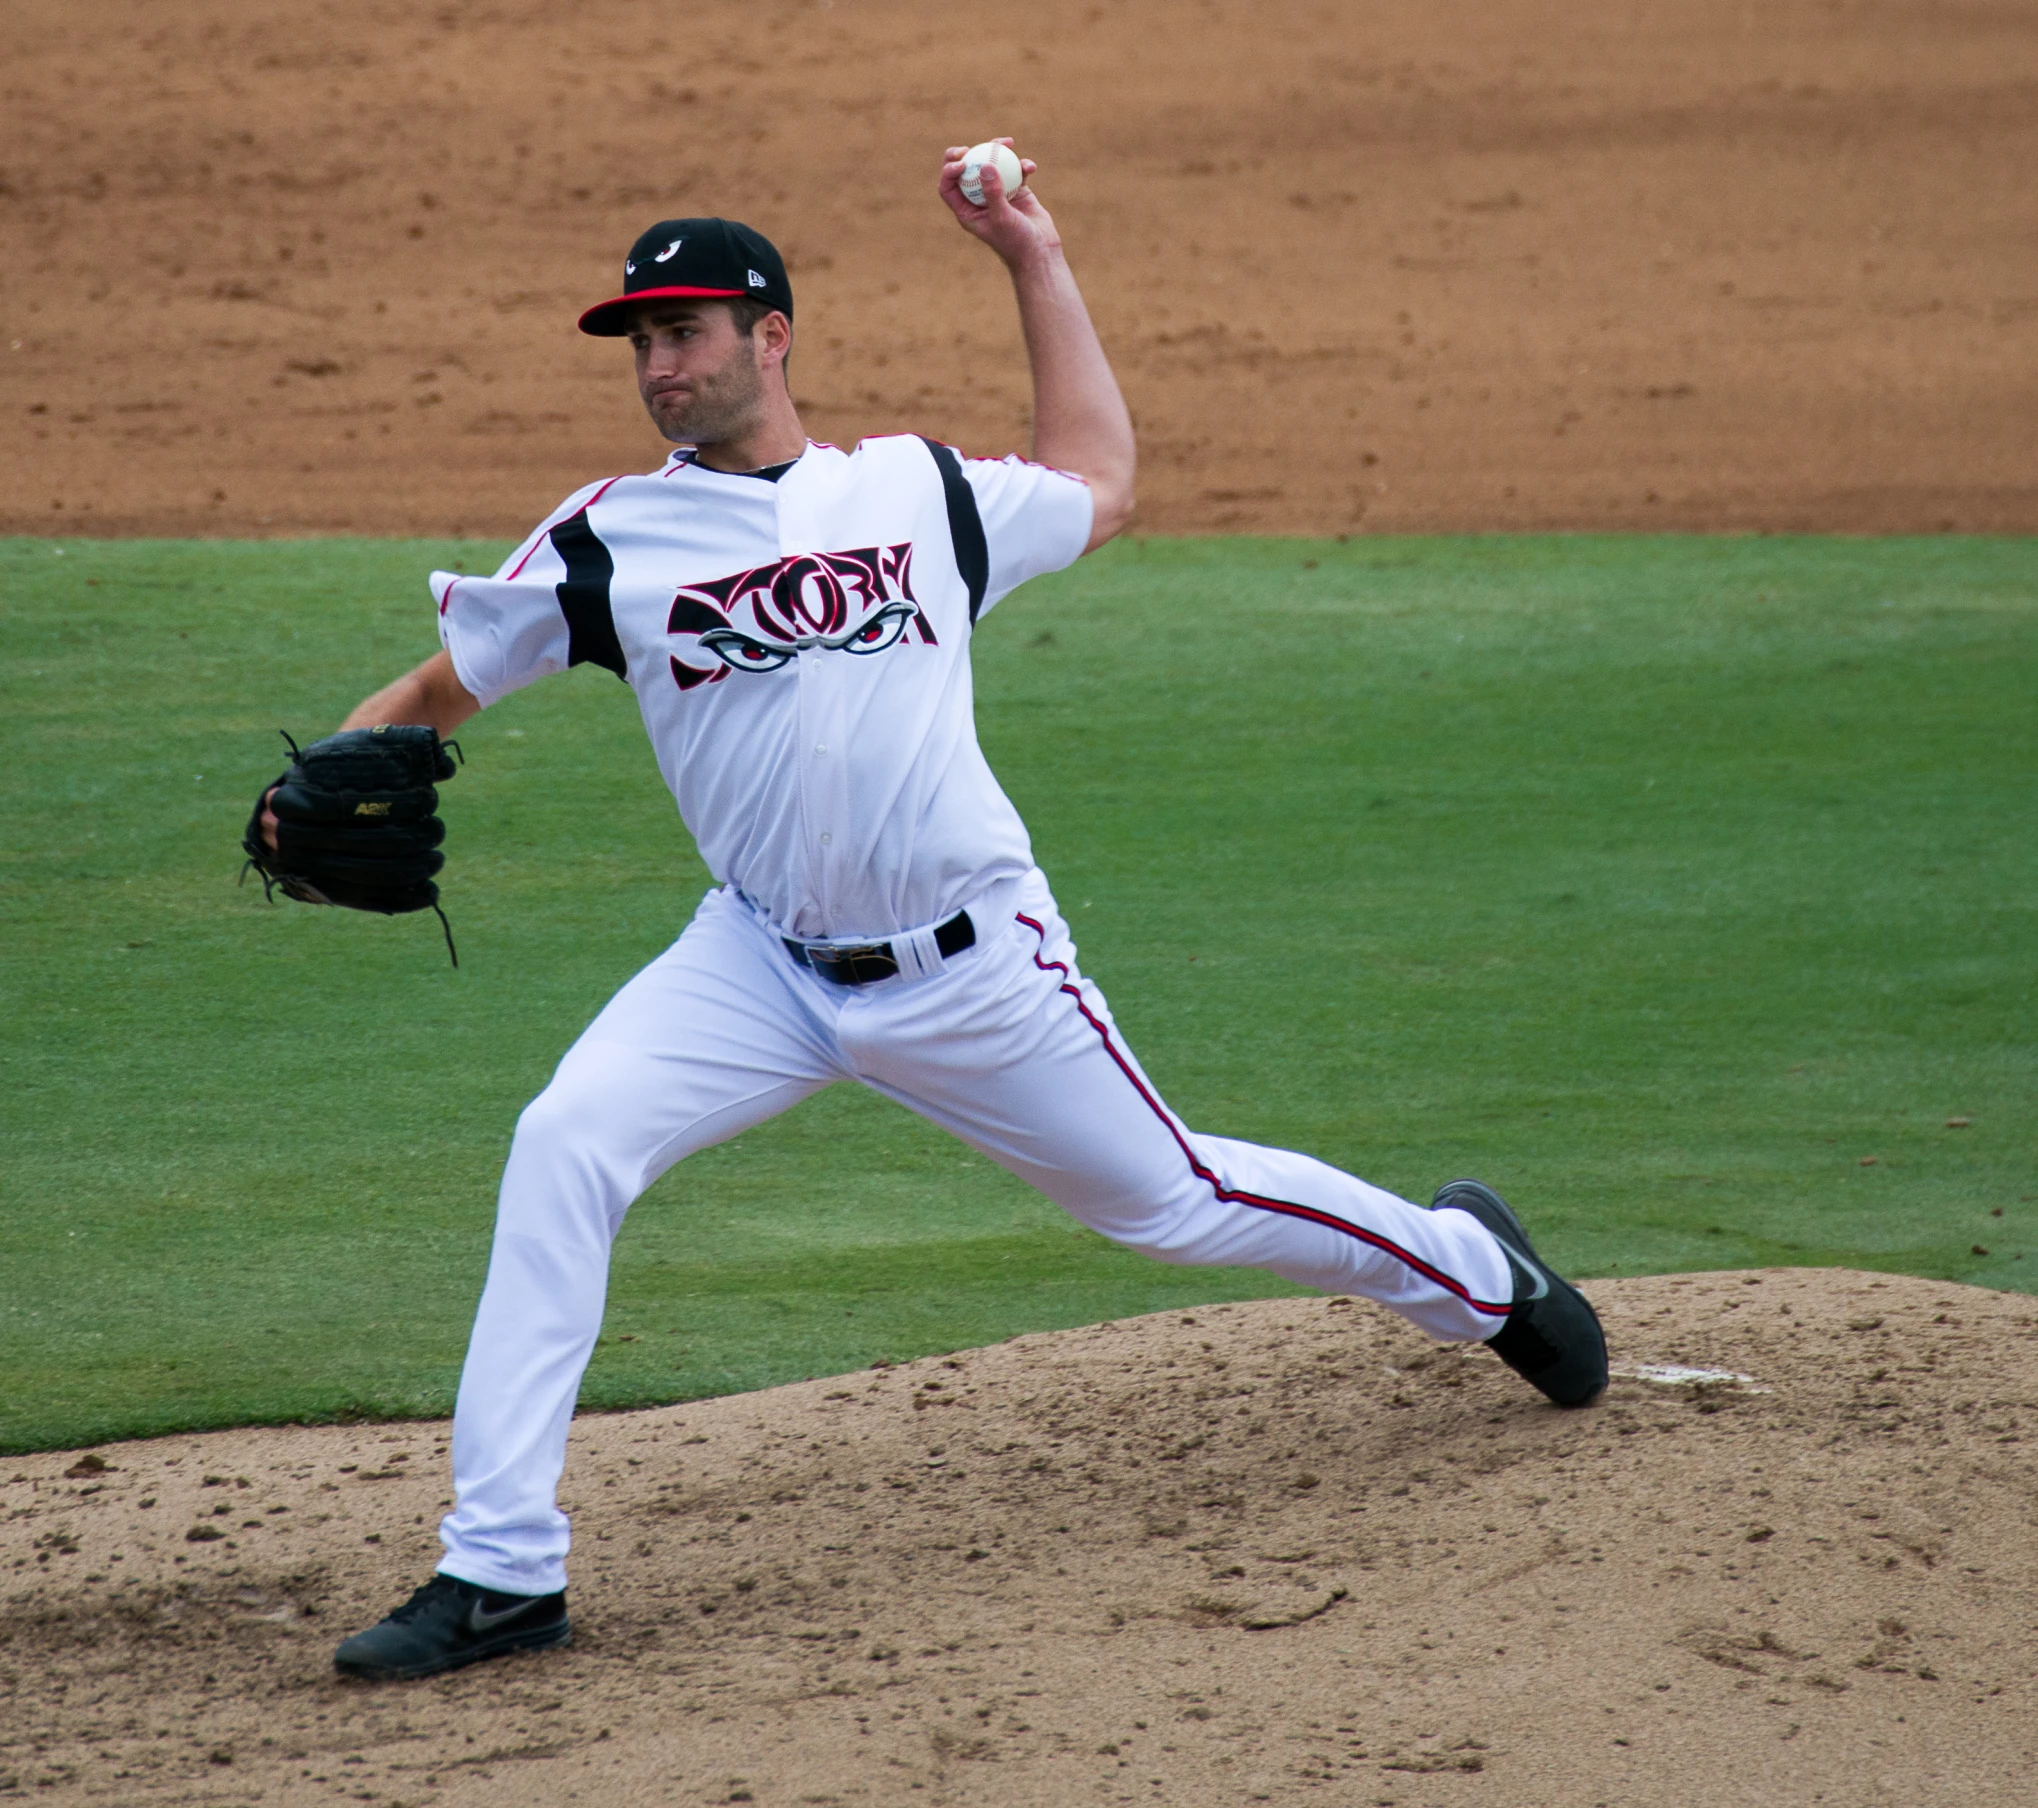 a baseball player throwing a pitch from the mound